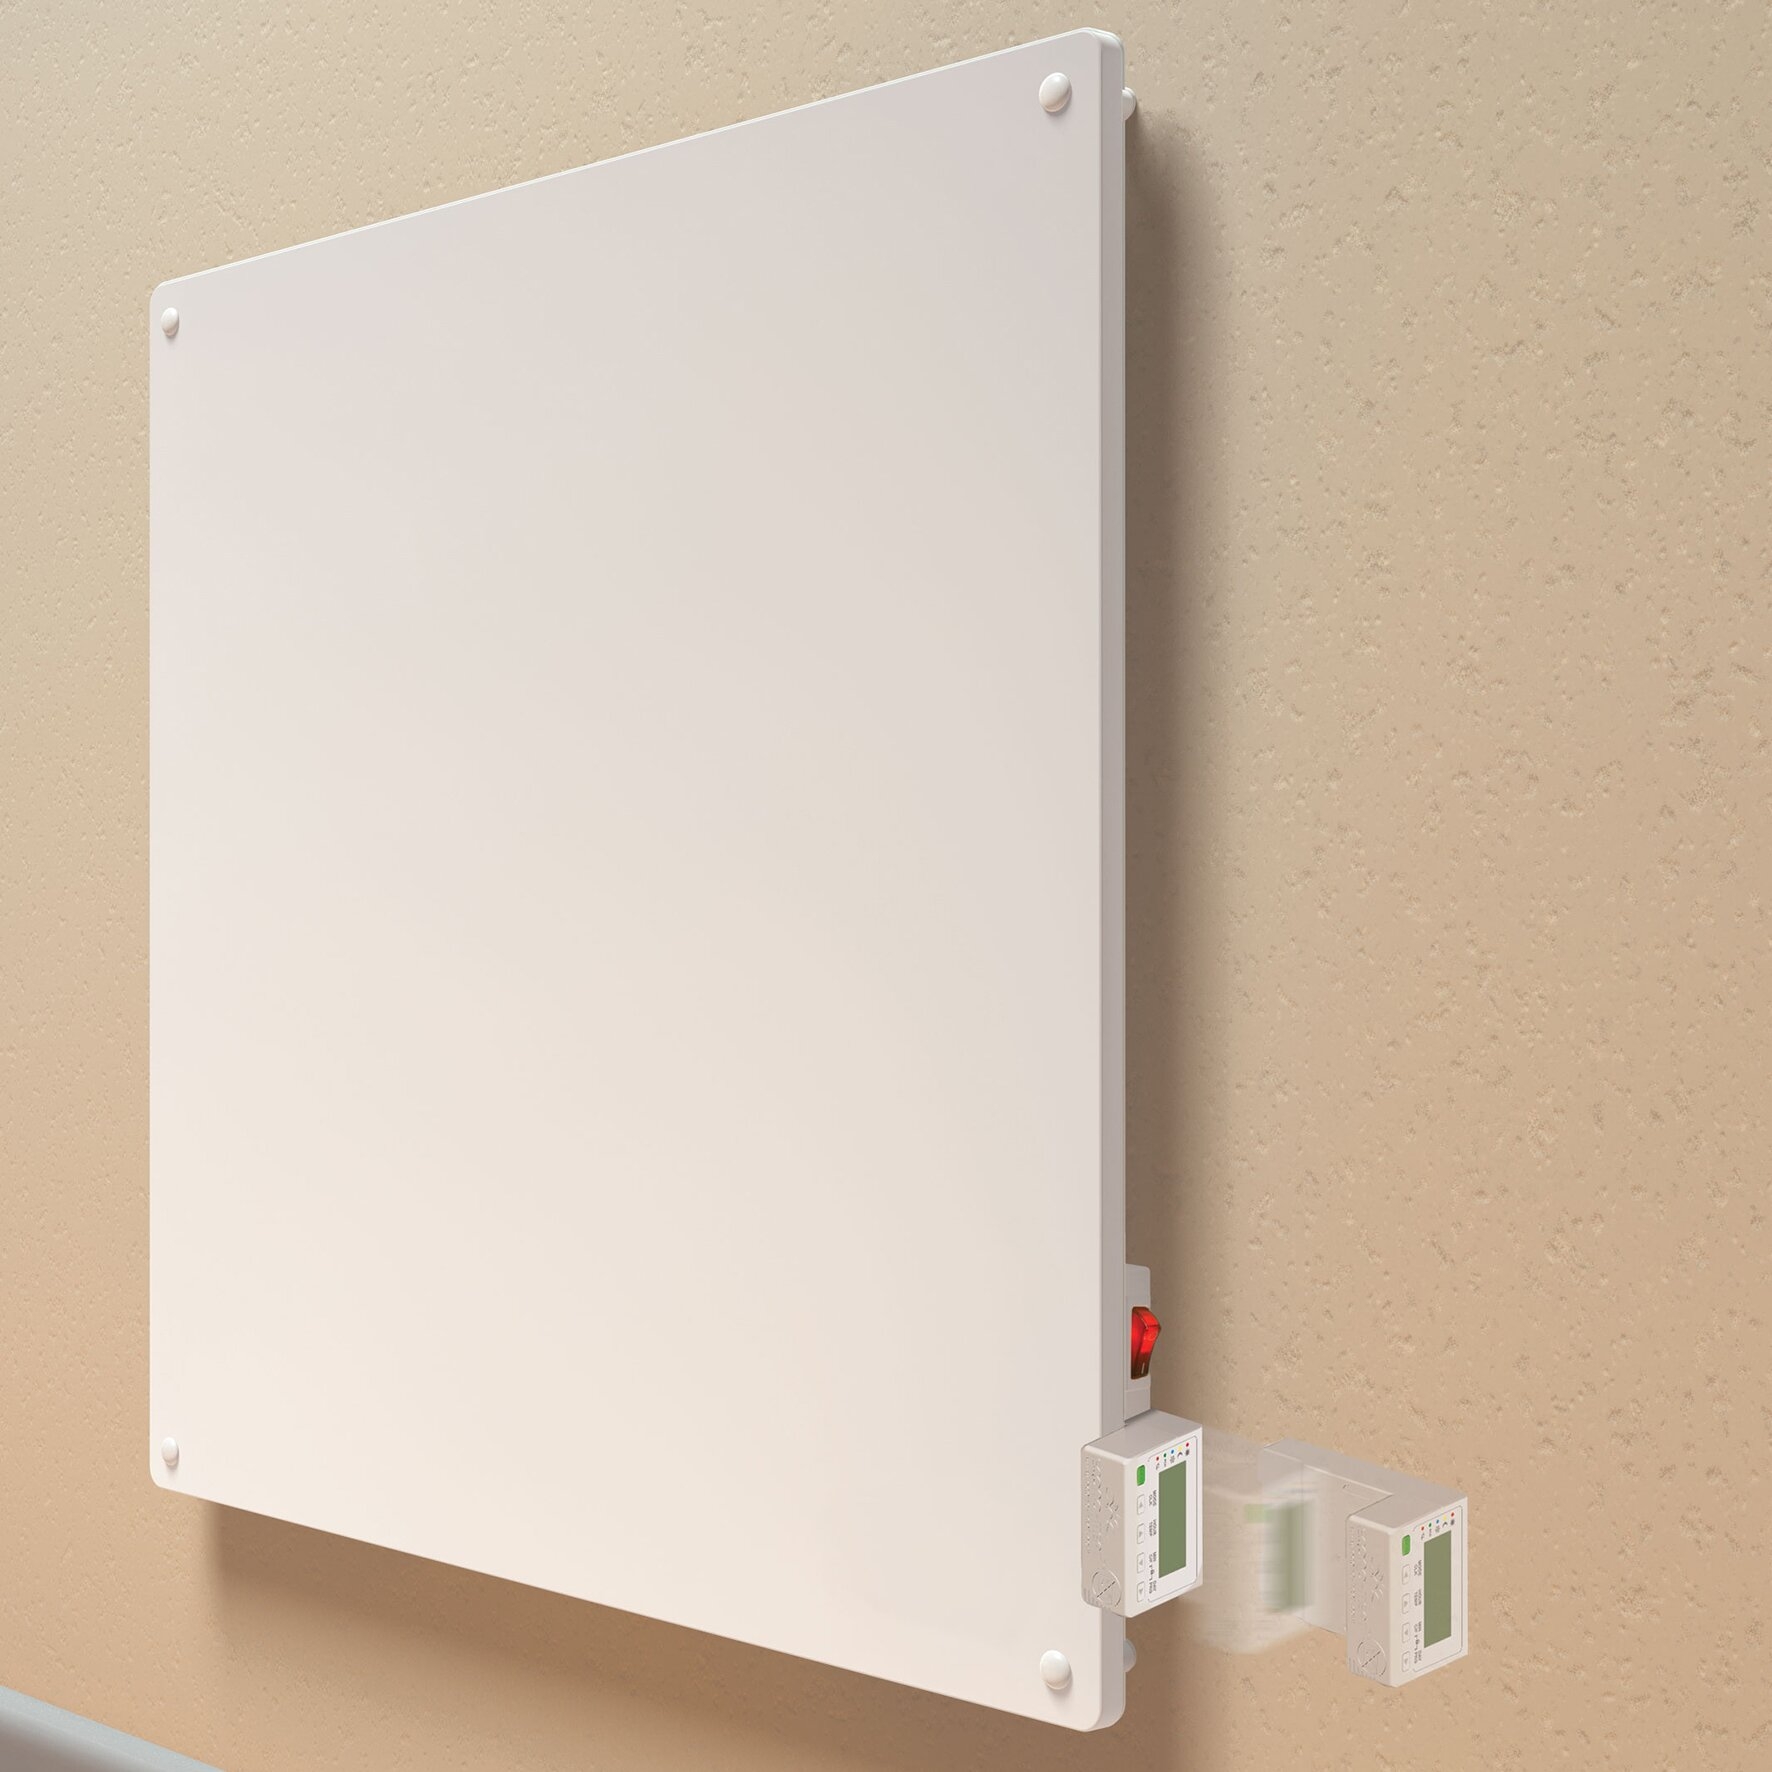 400 Watt Wall Panel Convection Heater with Programmable Thermostat